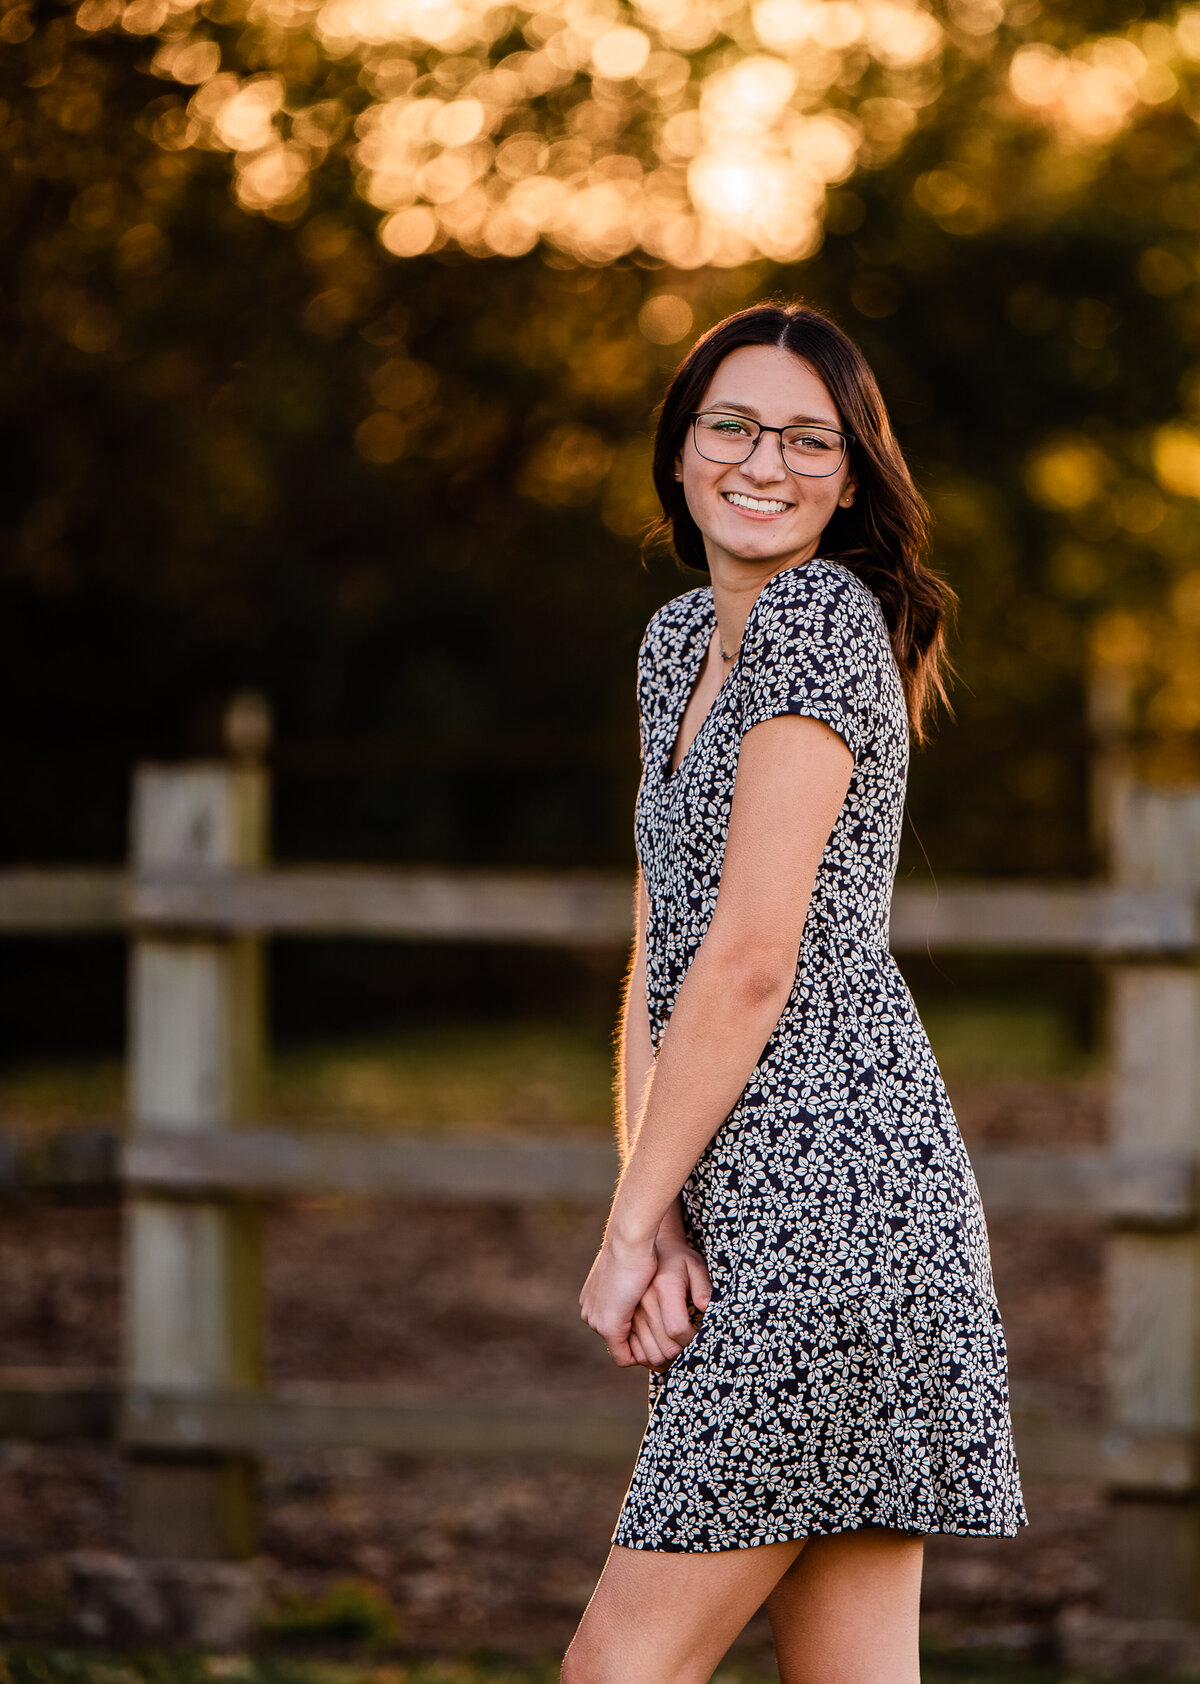 A senior in a black floral dress stands in front of a rustic wooden fence at sunset at Ghirardi Park.